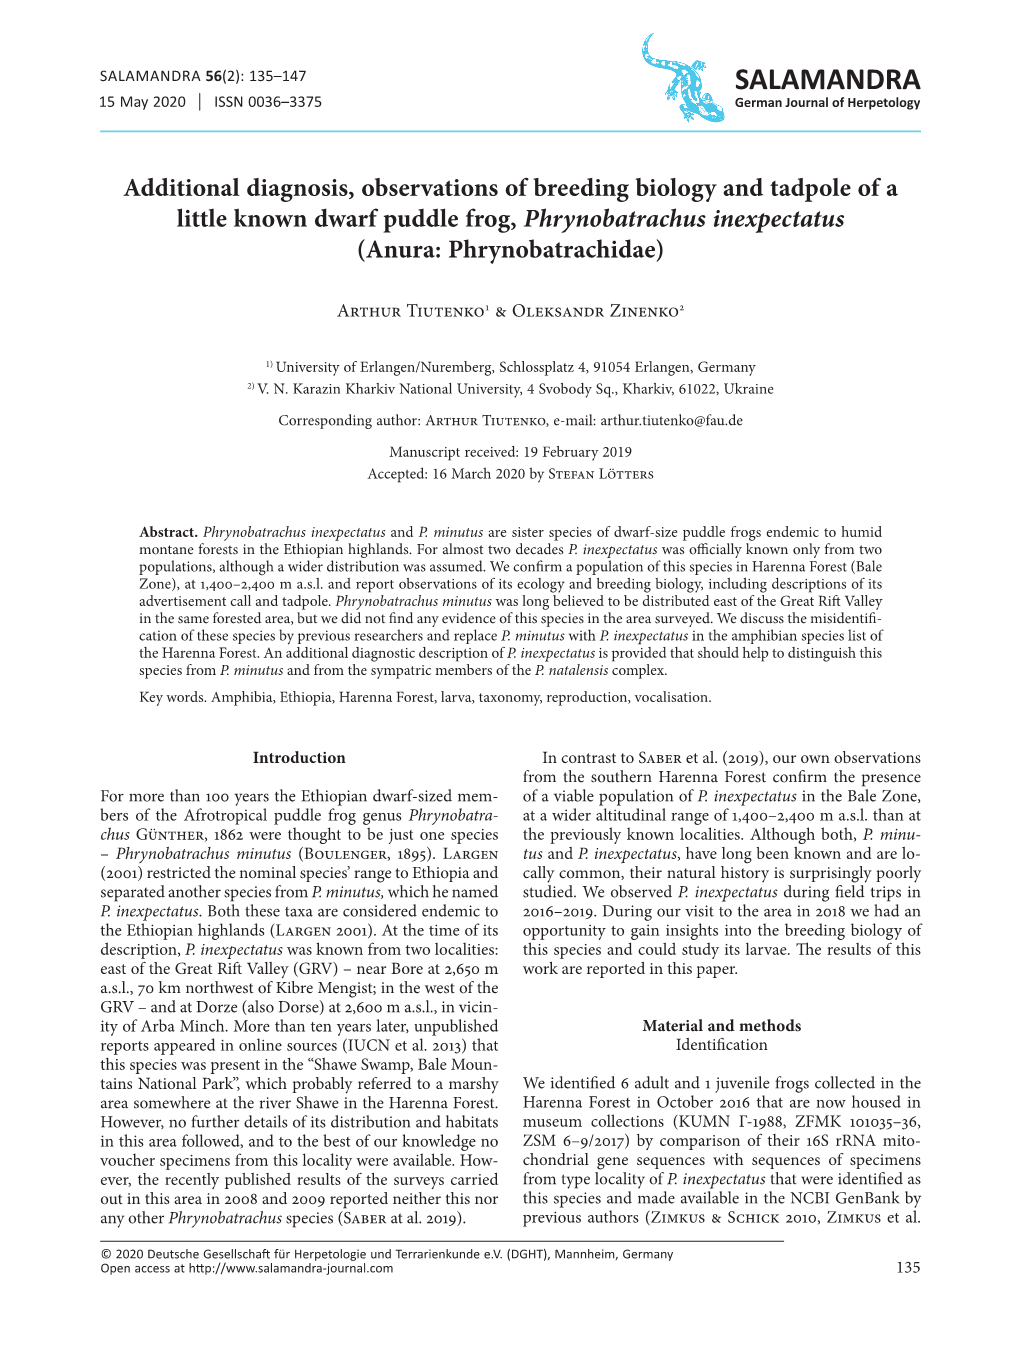 Additional Diagnosis, Observations of Breeding Biology and Tadpole of a Little Known Dwarf Puddle Frog, Phrynobatrachus Inexpectatus (Anura: Phrynobatrachidae)